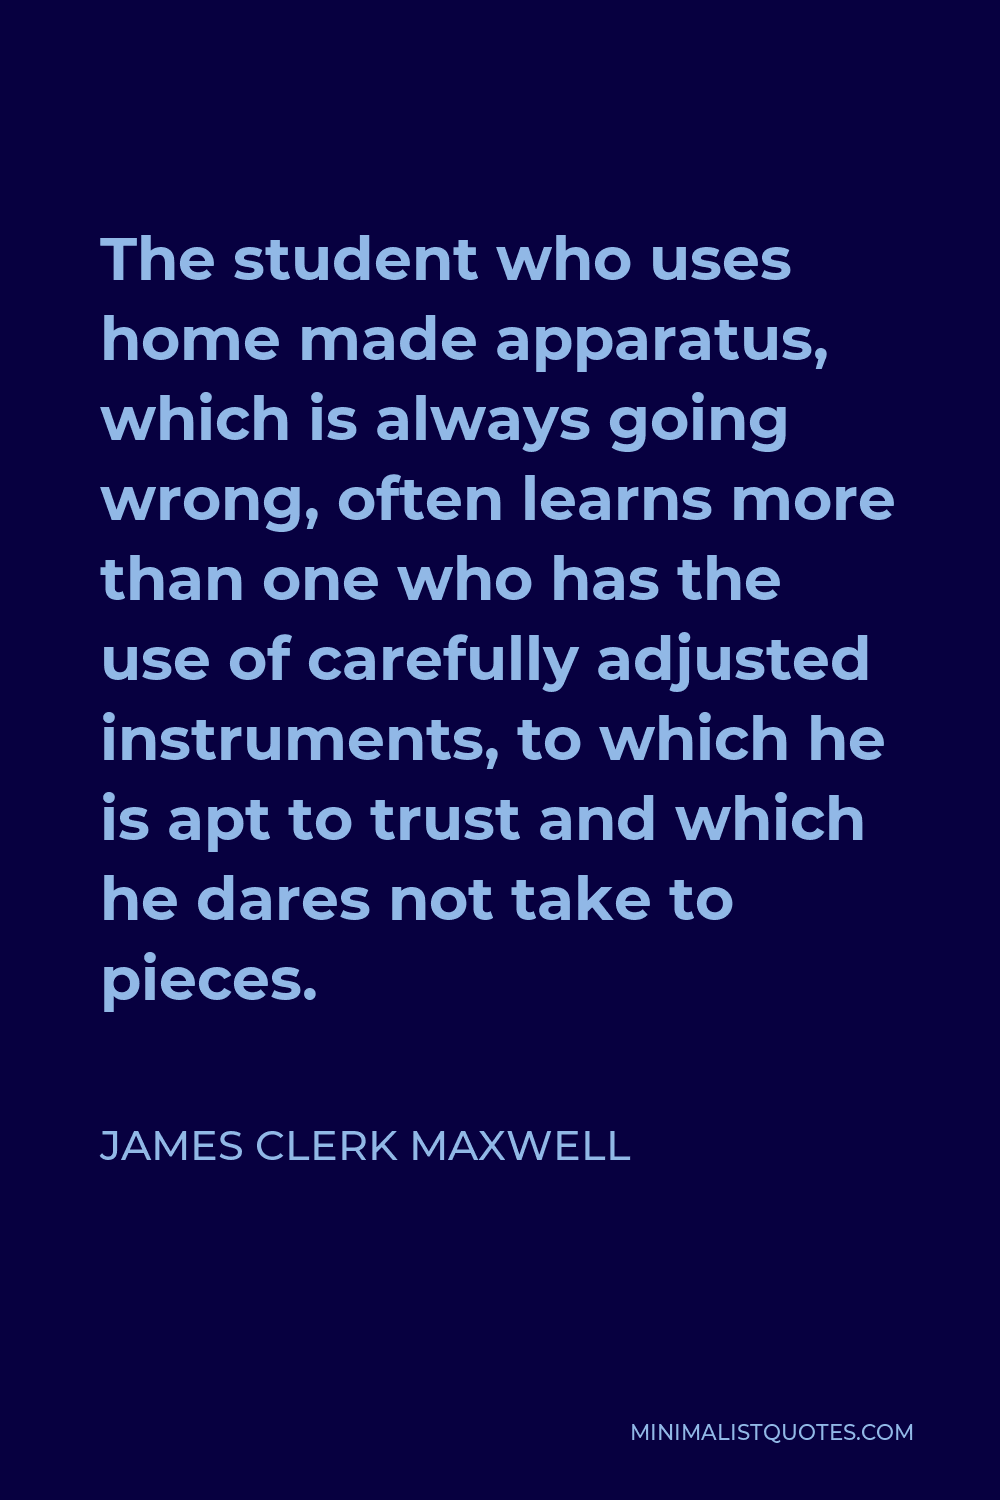 James Clerk Maxwell Quote - The student who uses home made apparatus, which is always going wrong, often learns more than one who has the use of carefully adjusted instruments, to which he is apt to trust and which he dares not take to pieces.